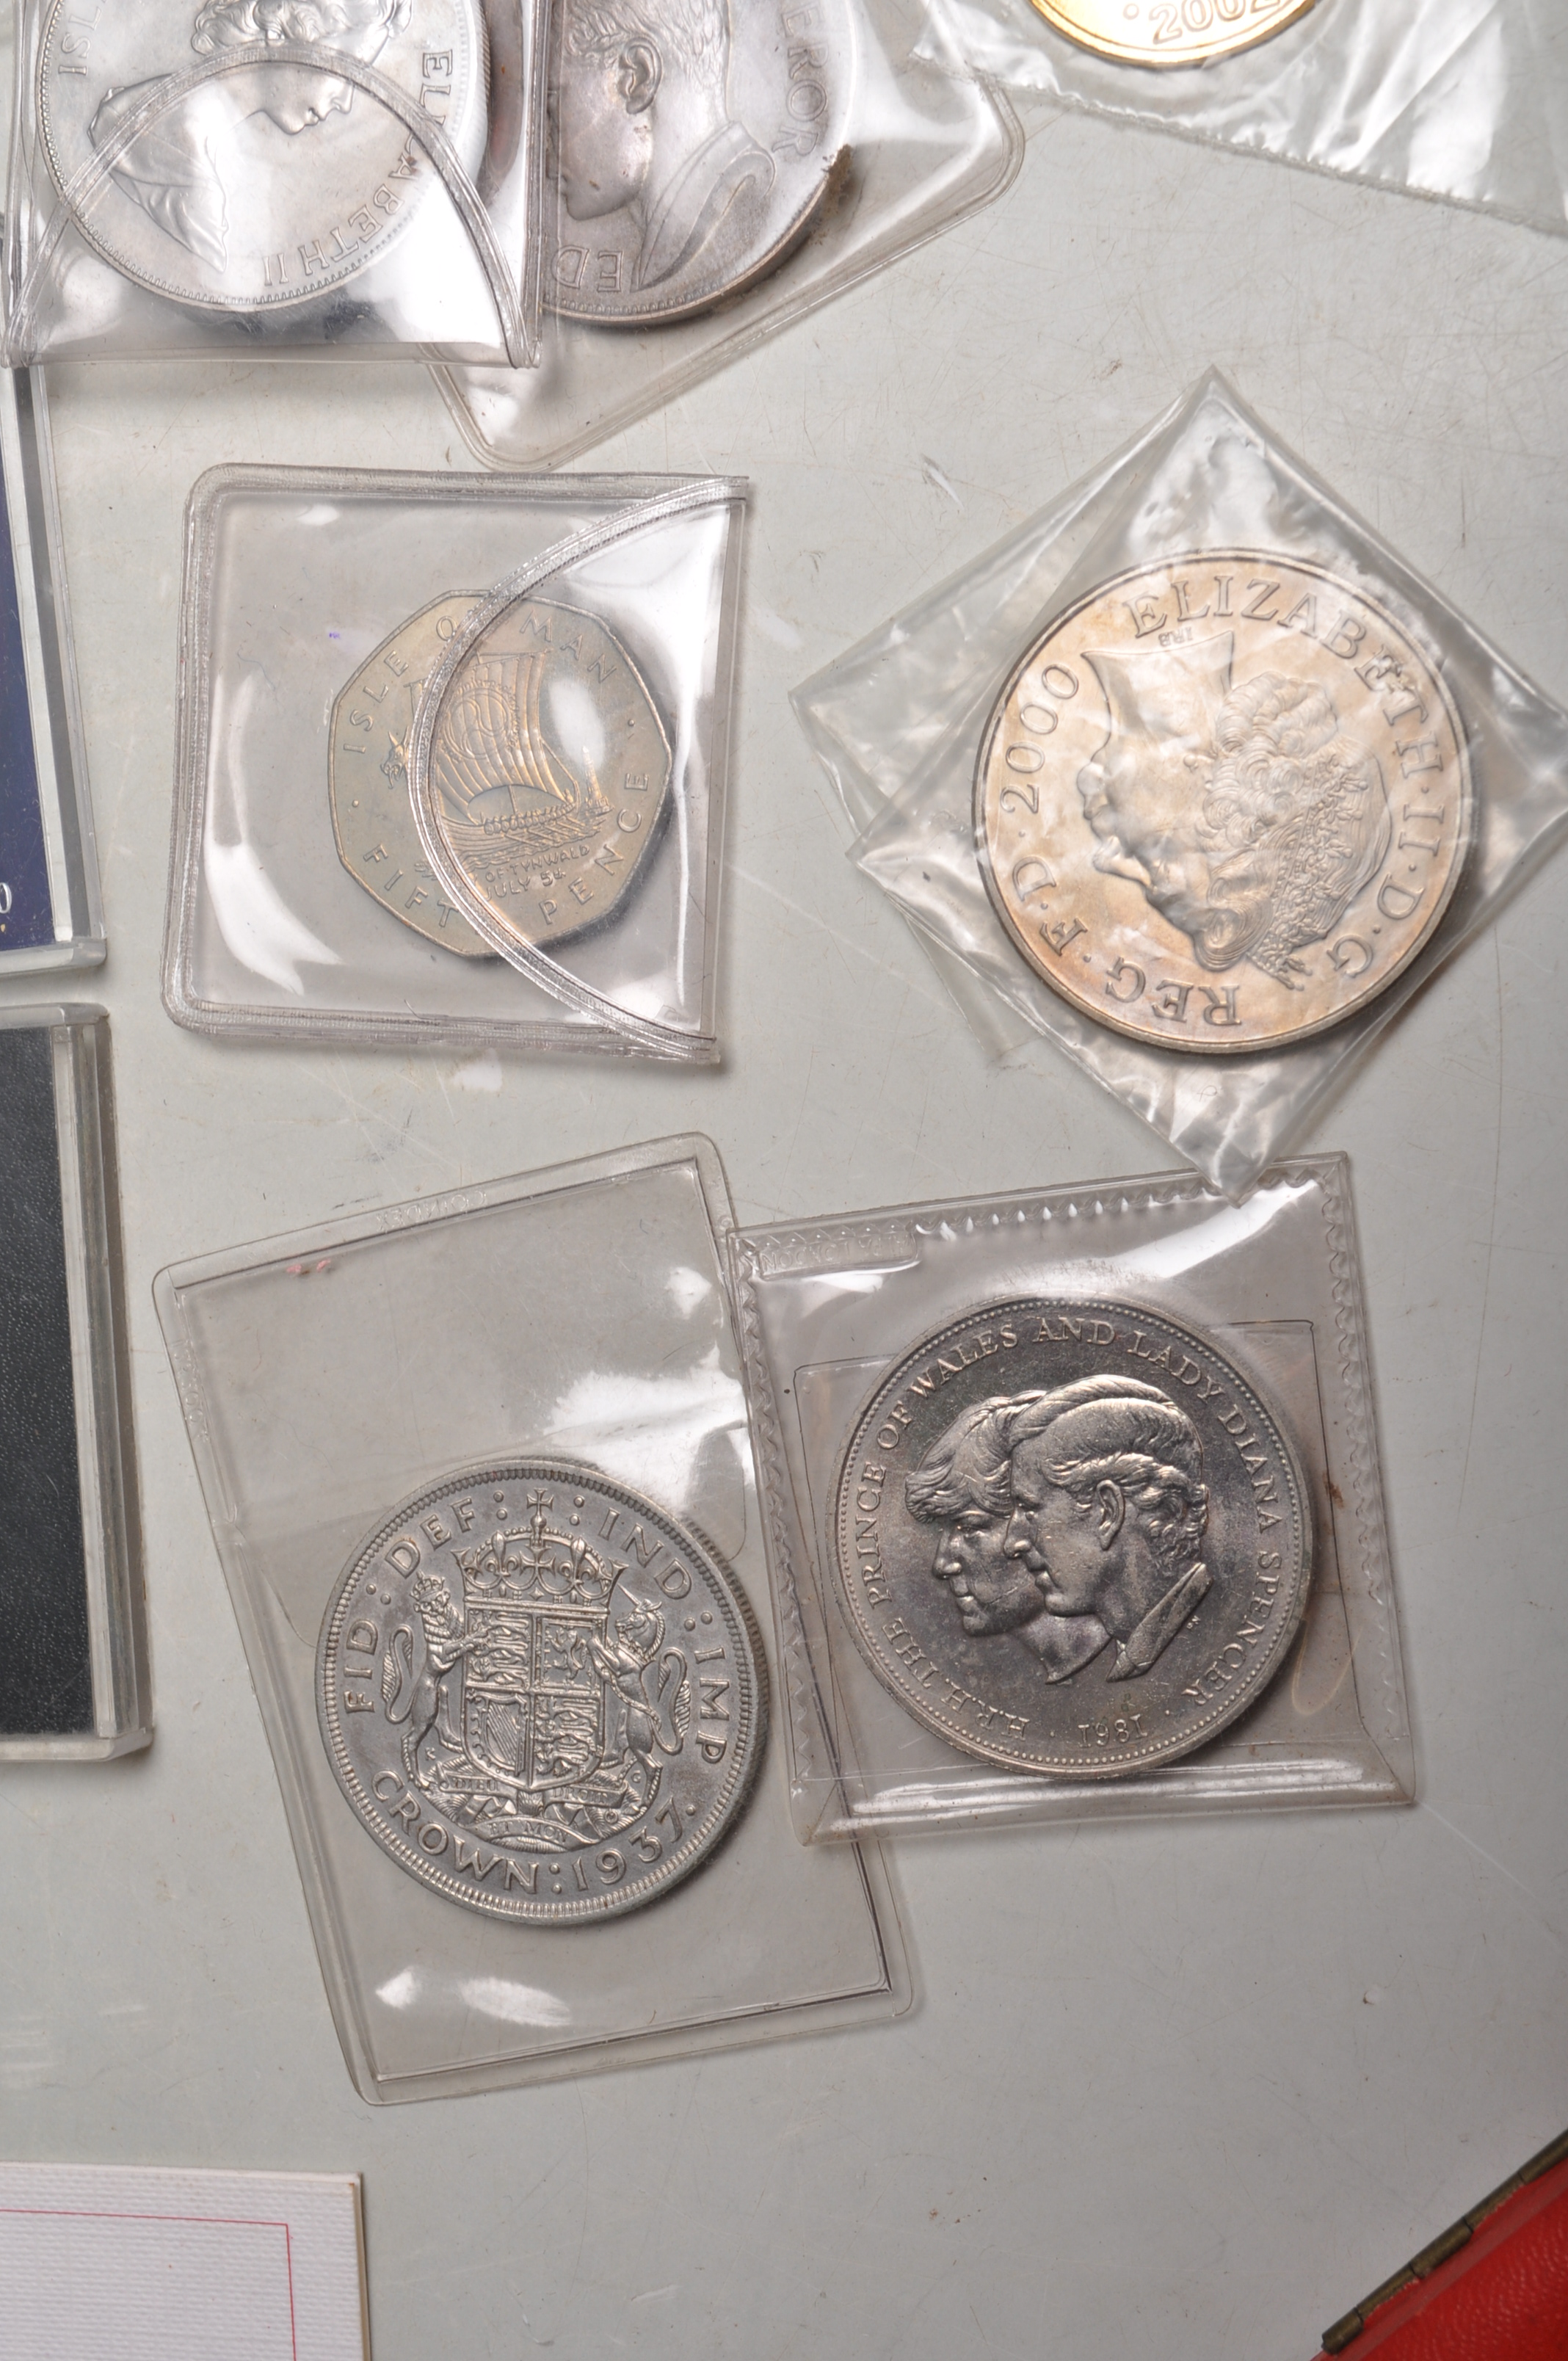 LARGE COLLECTION OF 20TH CENTURY UK CURRENCY AND COMMORATIVE COINS - Image 6 of 14